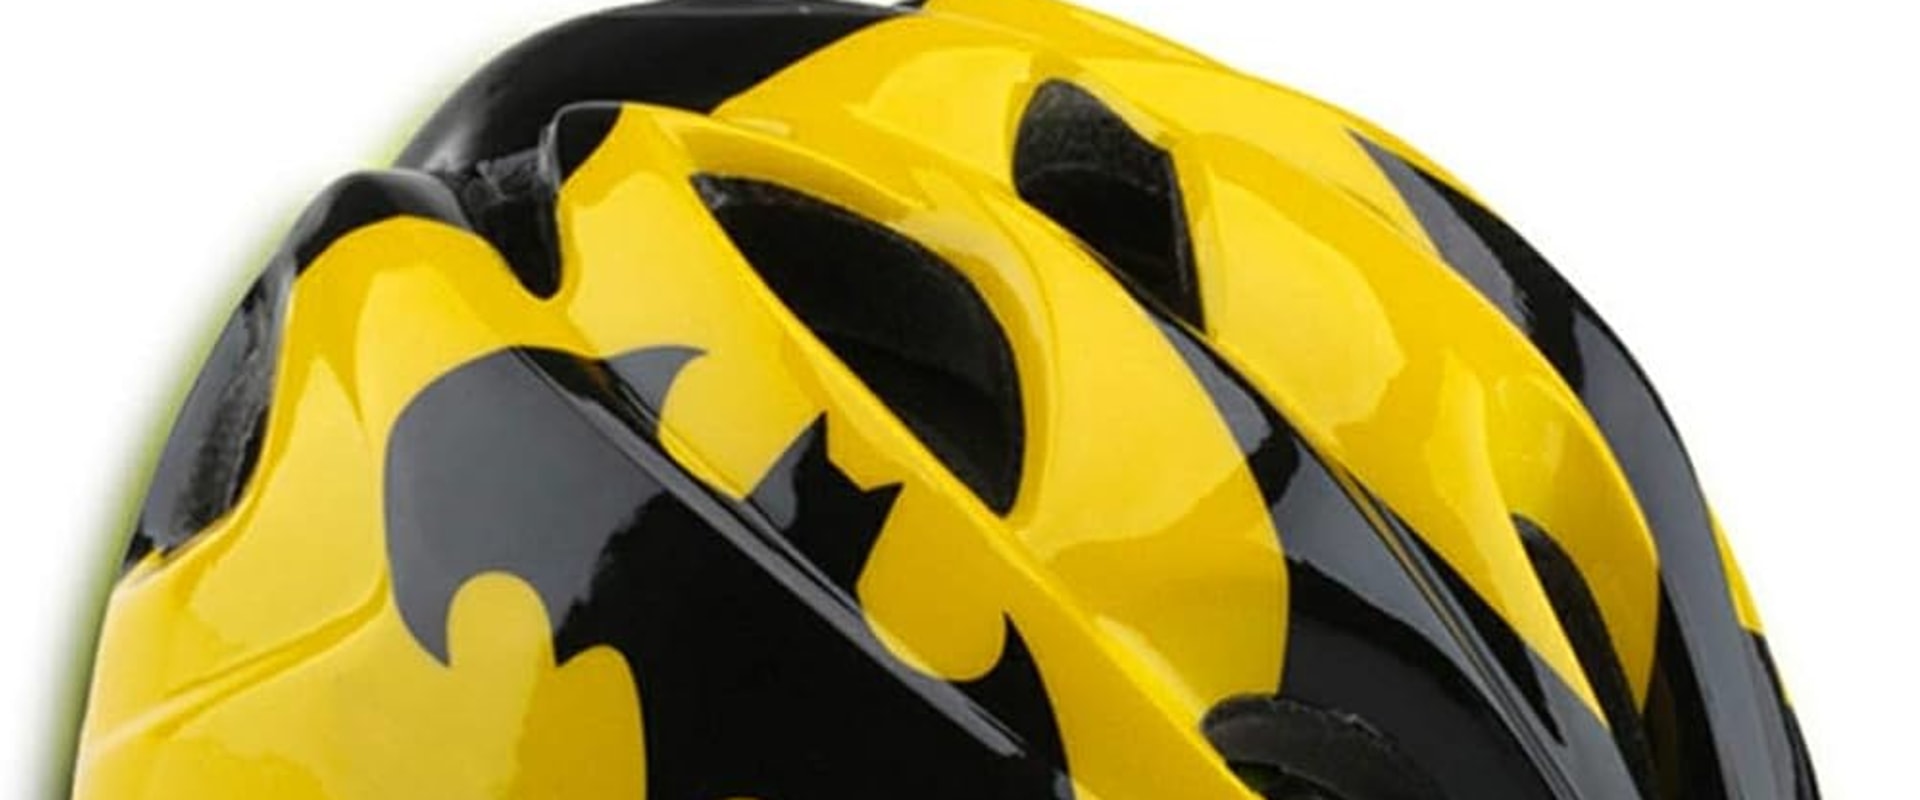 Helmets and Protective Gear: What You Need to Know